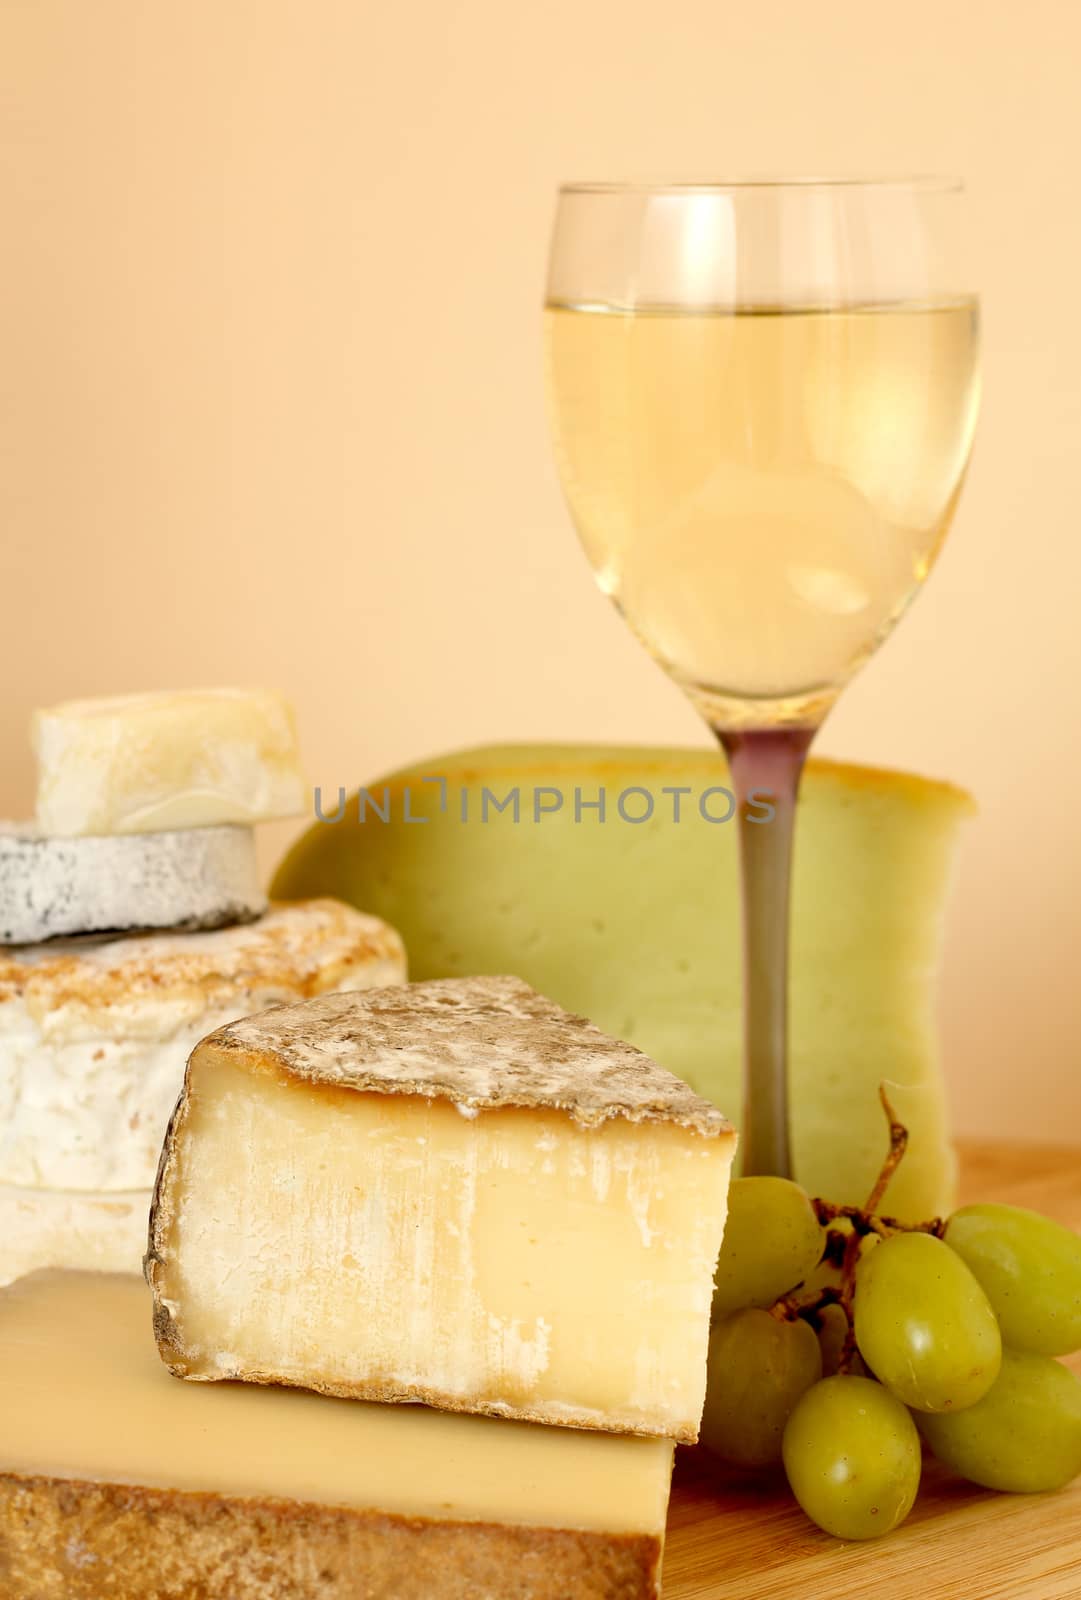 Composition with french wine, cheese and grape on wooden table